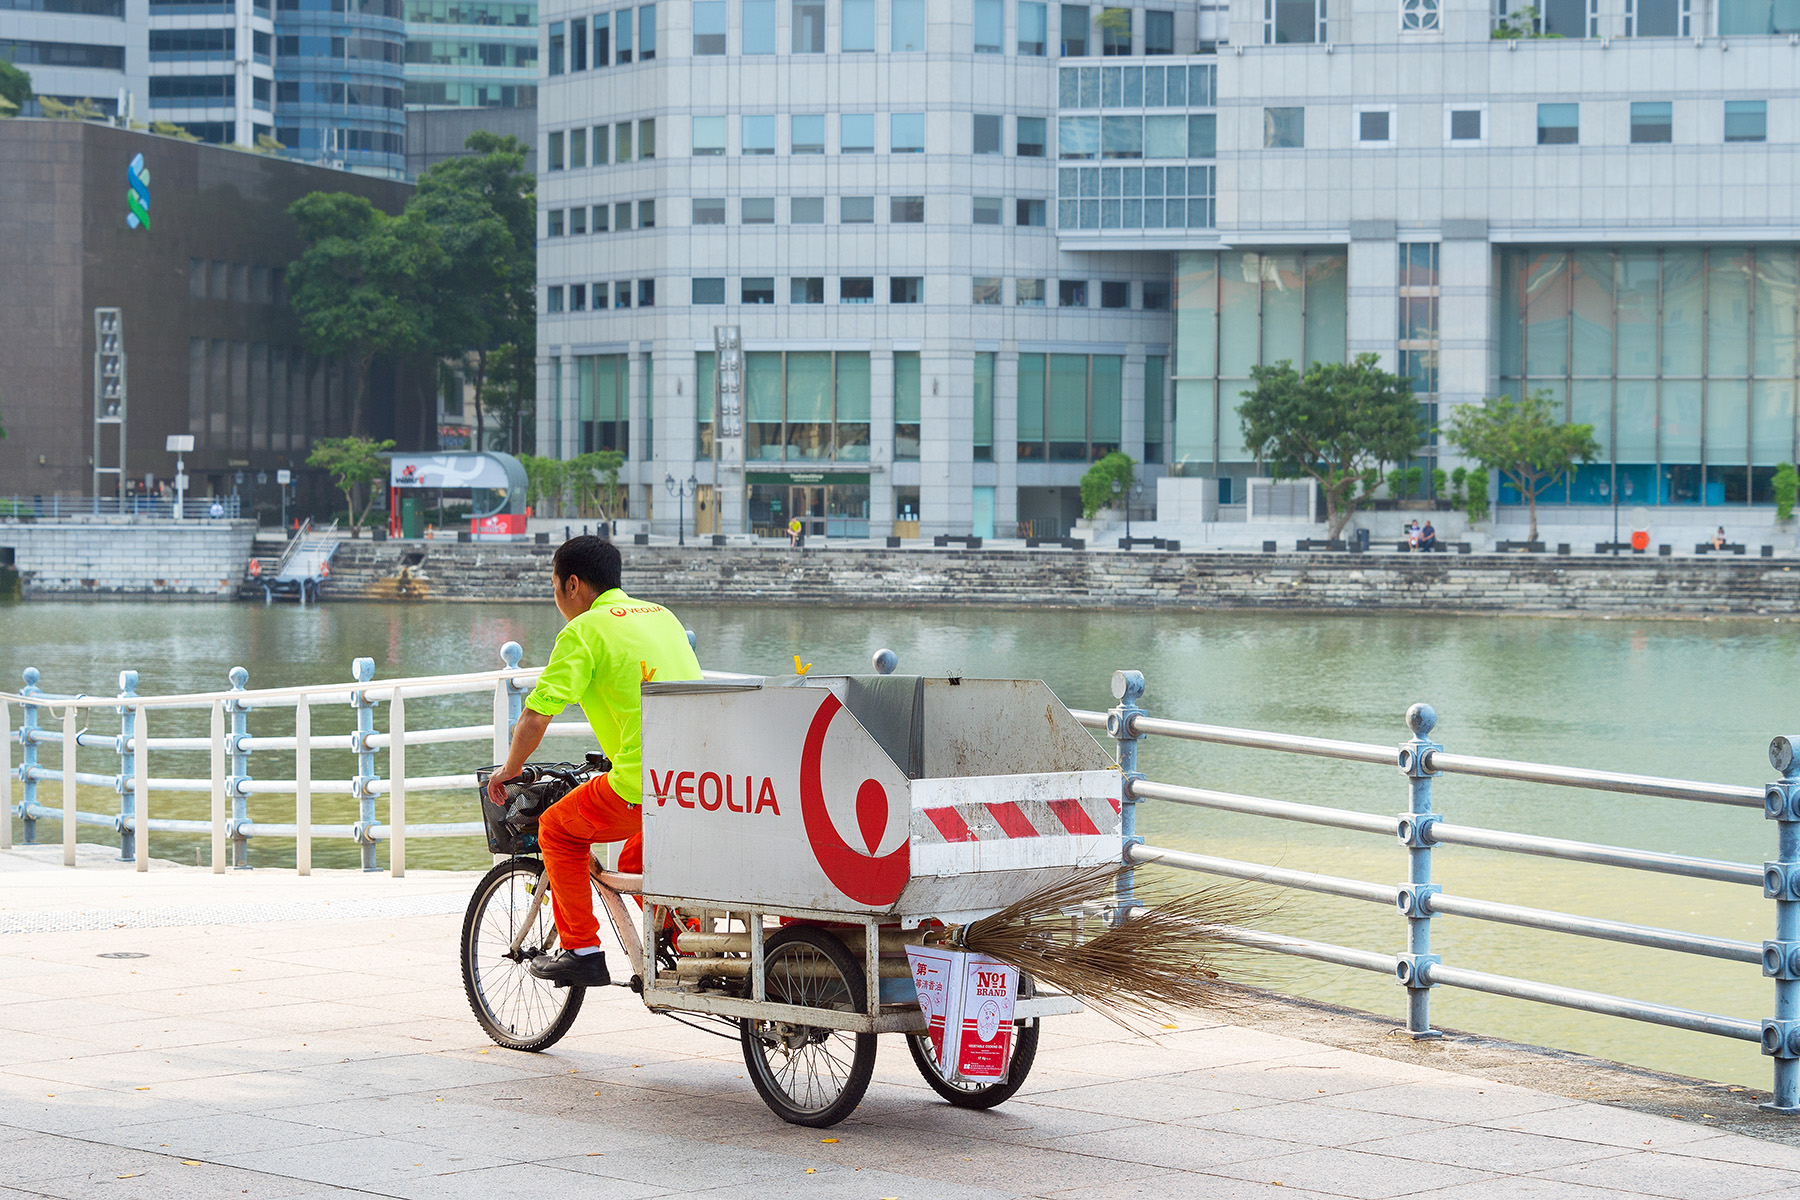 Garbage service worker cycling with his trash cart on a downtown embankment in Singapore.